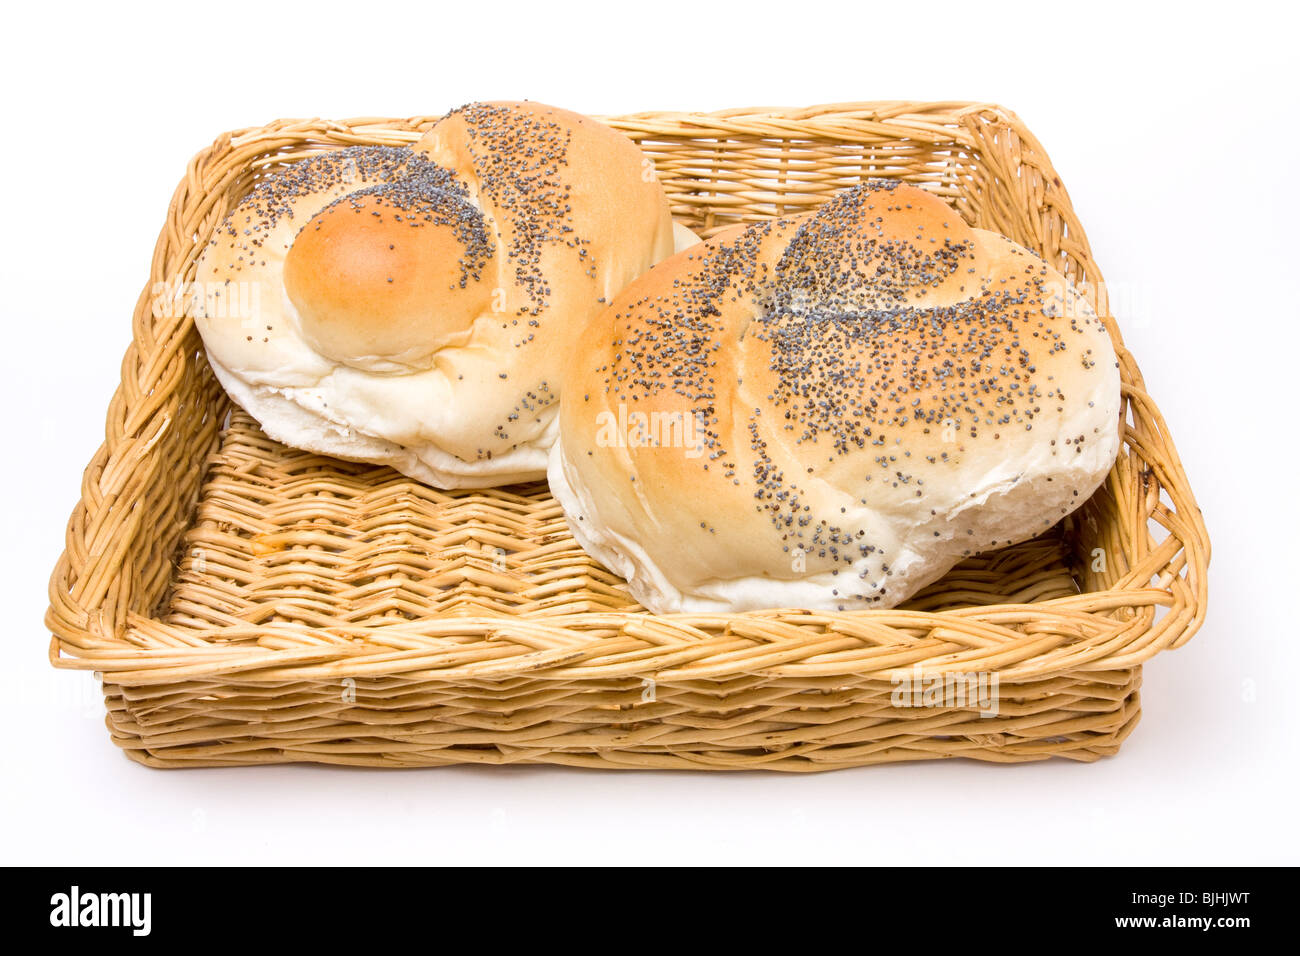 Seeded bread roll in wicker basket from low viewpoint isolated against white background. Stock Photo